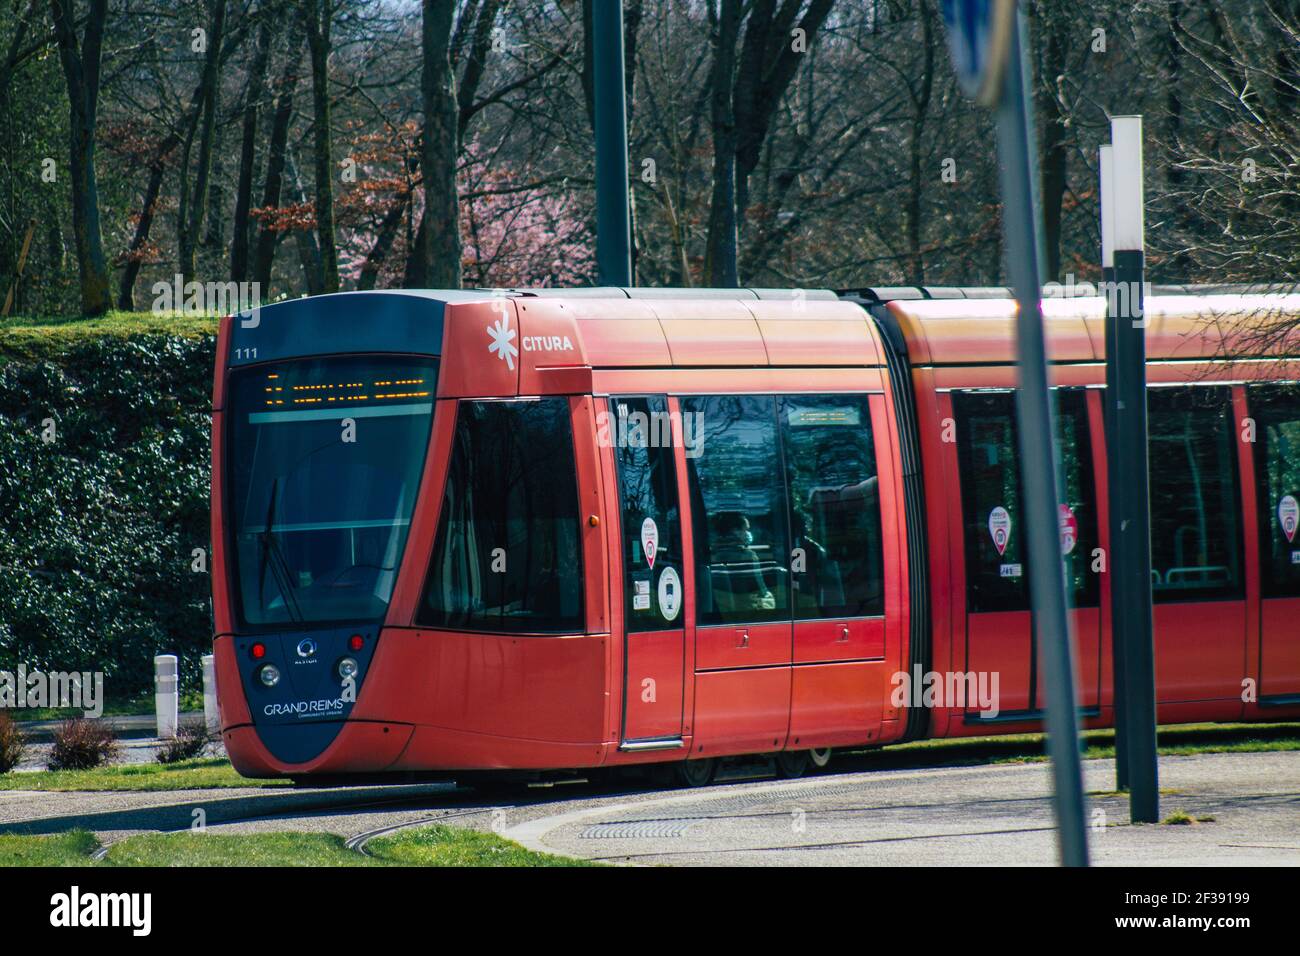 Reims France March 15, 2021 Modern electric tram for passengers rolling through the streets of Reims during the coronavirus outbreak hitting France Stock Photo